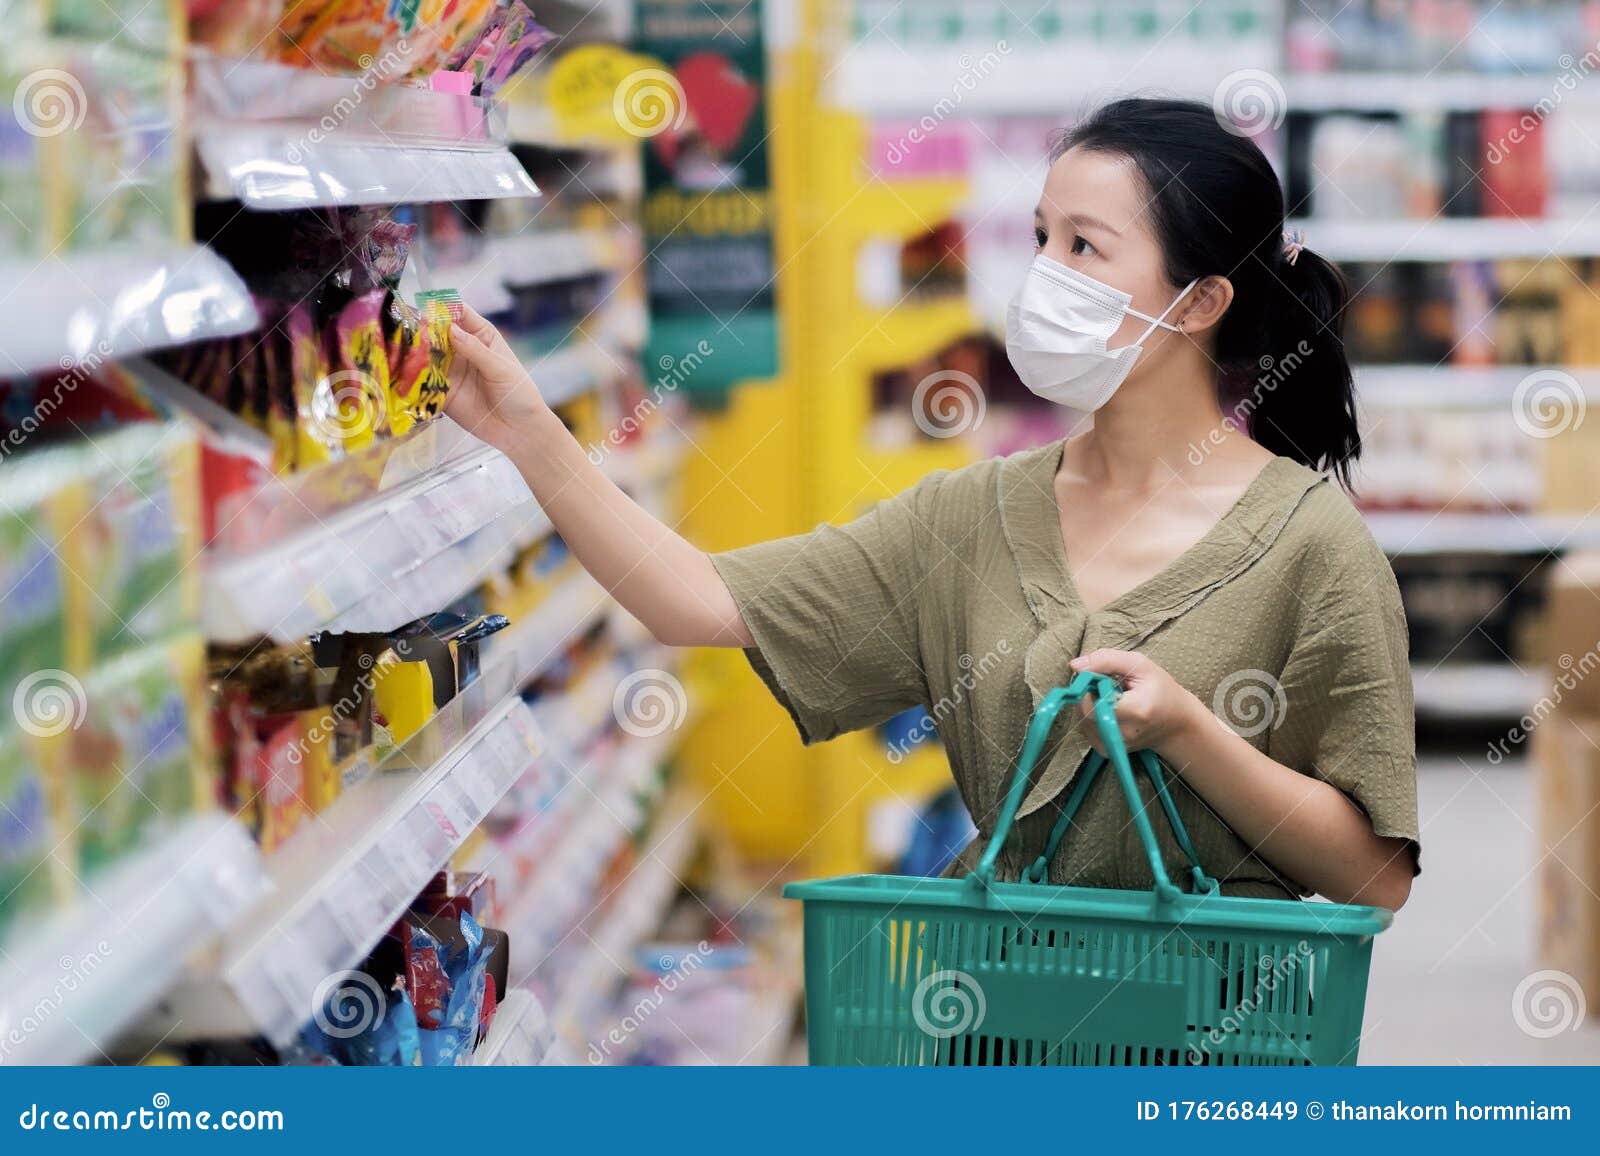 asian women and surgical mask shopping some food in supermarket, covid-19 crisis